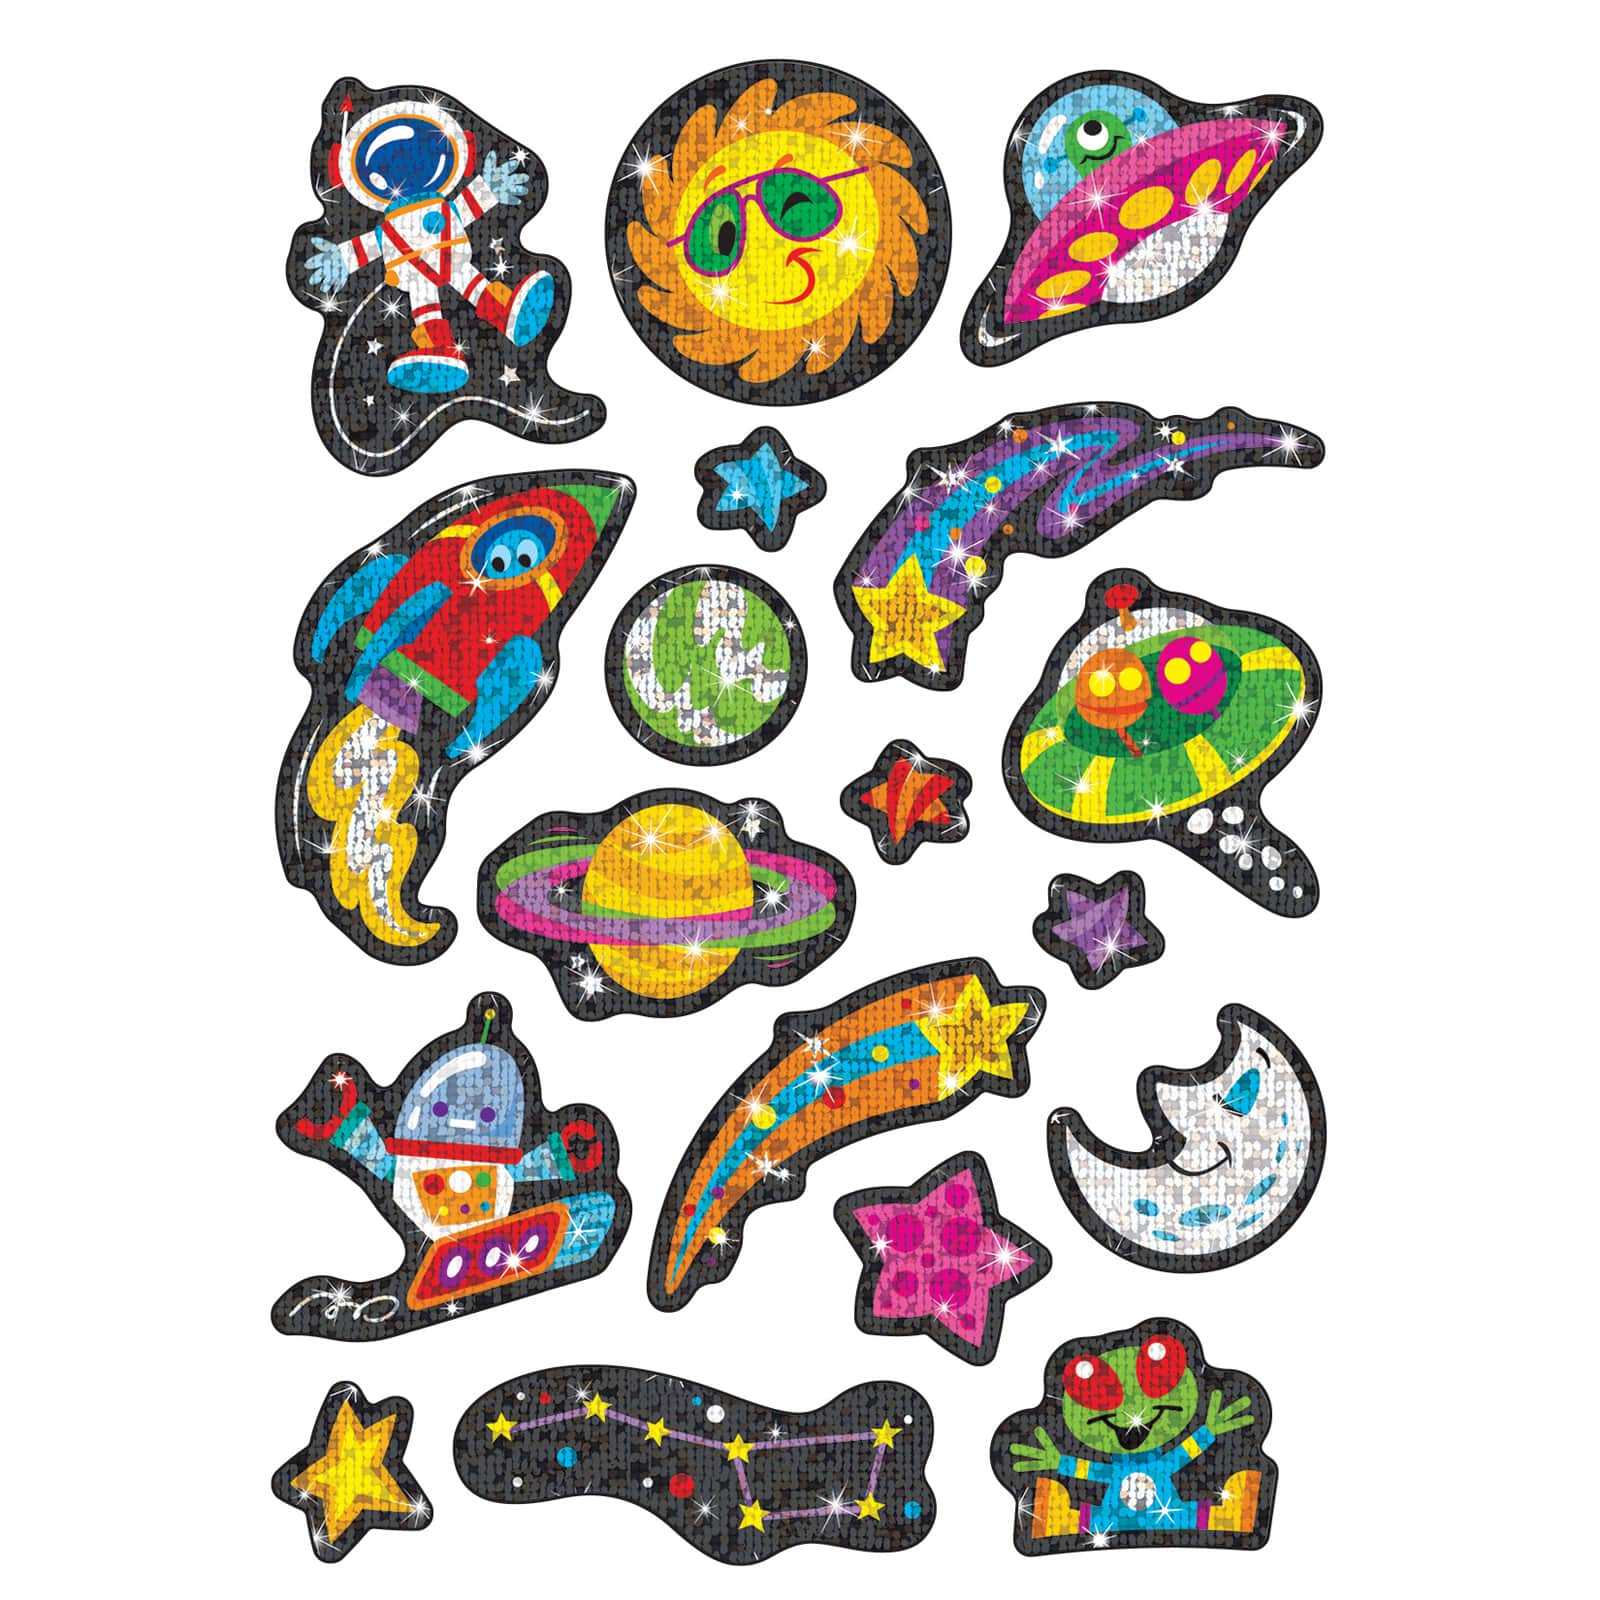 Trend Enterprises® Sparkly Space Stuff Sparkle STICKERS®, 6 Packs of 36